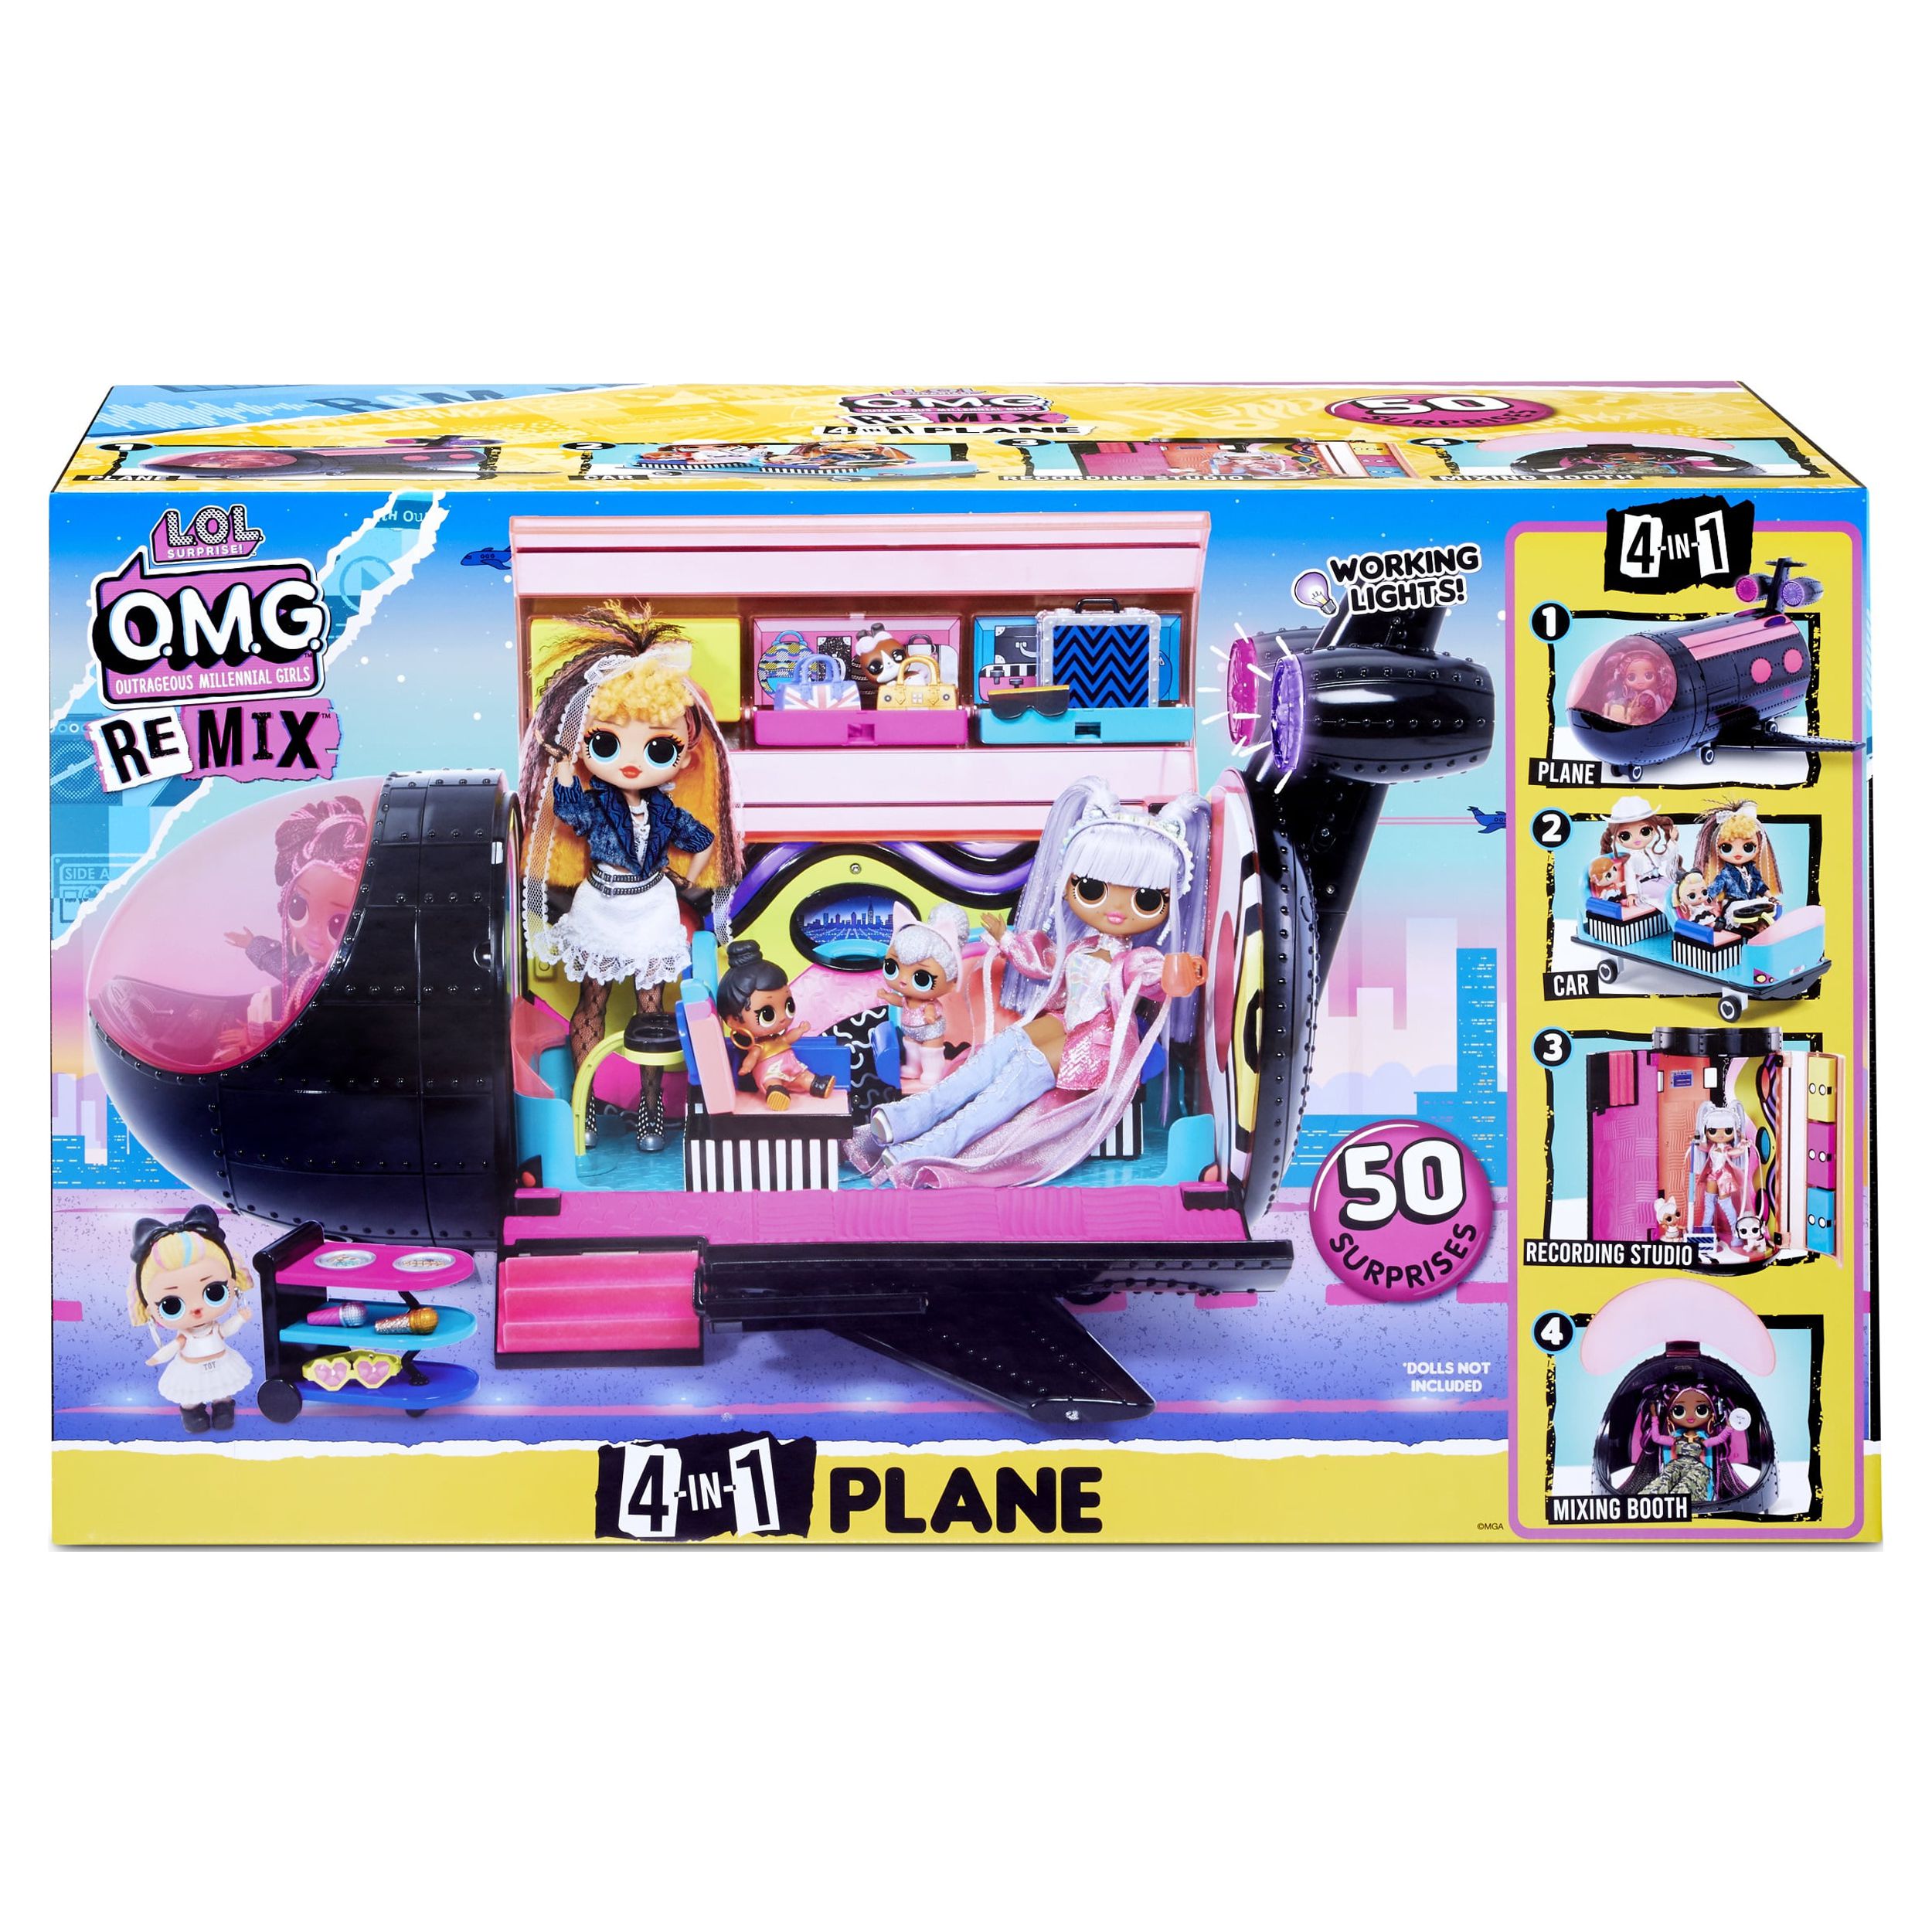 LOL Surprise OMG Remix 4-in-1 Plane Playset With Music Recording Studio, Mixing Booth and 50 Surprises, Great Gift for Kids Ages 4 5 6+ - image 1 of 8